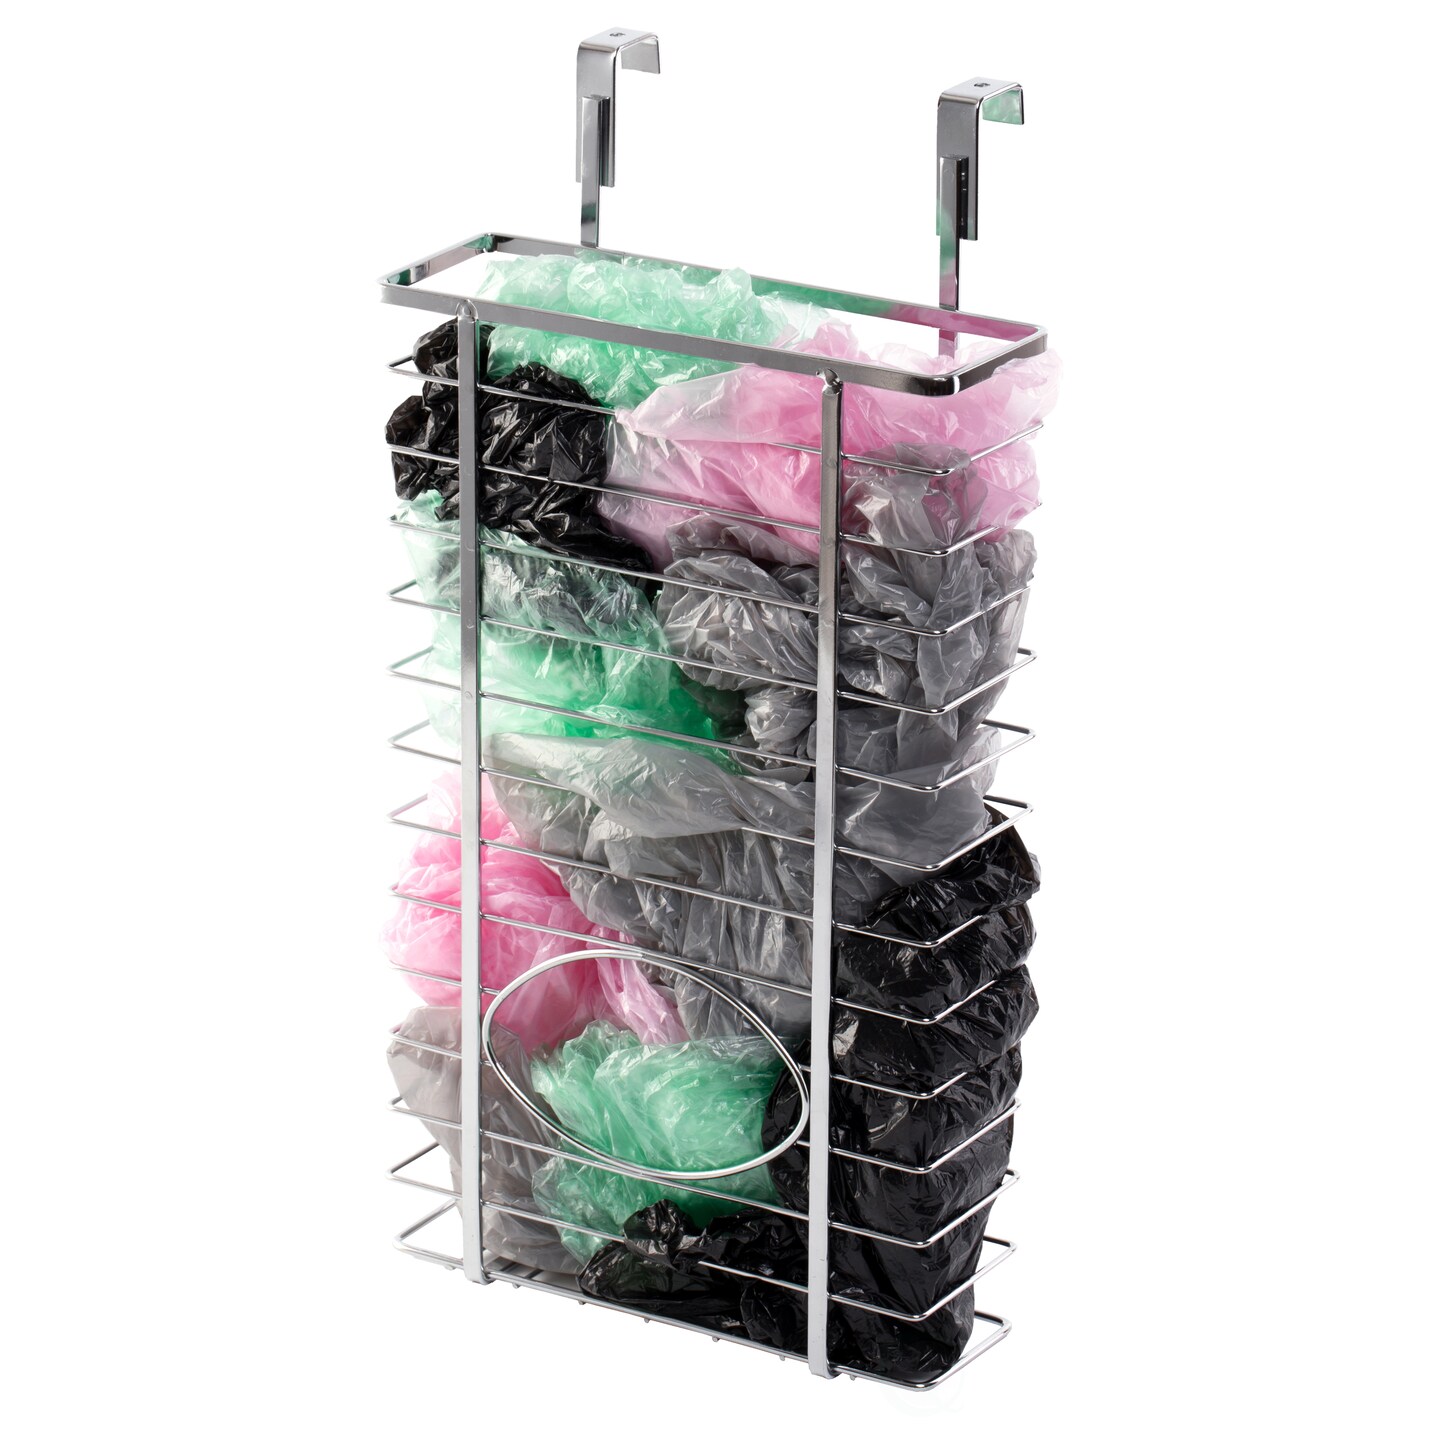 Basicwise Over Cabinet Metal Plastic Bag and Grocery Bag Storage Holder, Chrome